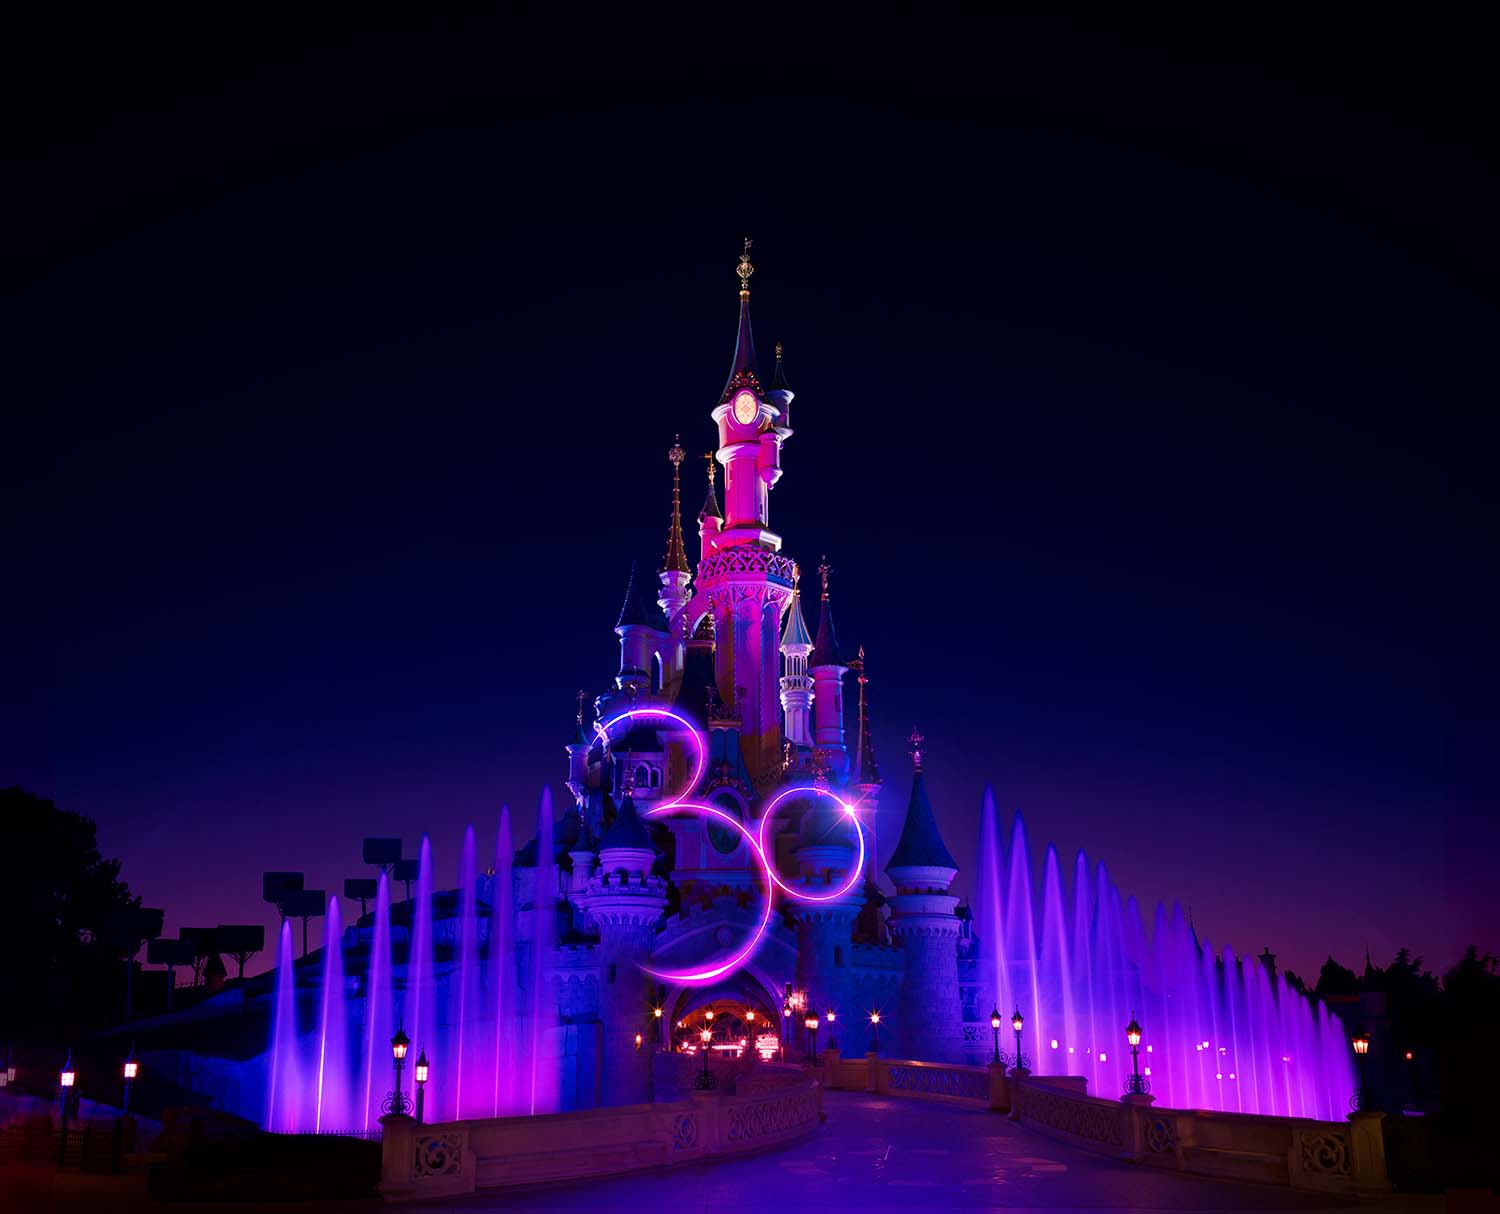 Disneyland® Paris will kick off its 30th Anniversary Celebration in just 6 months, on March 6, 2022